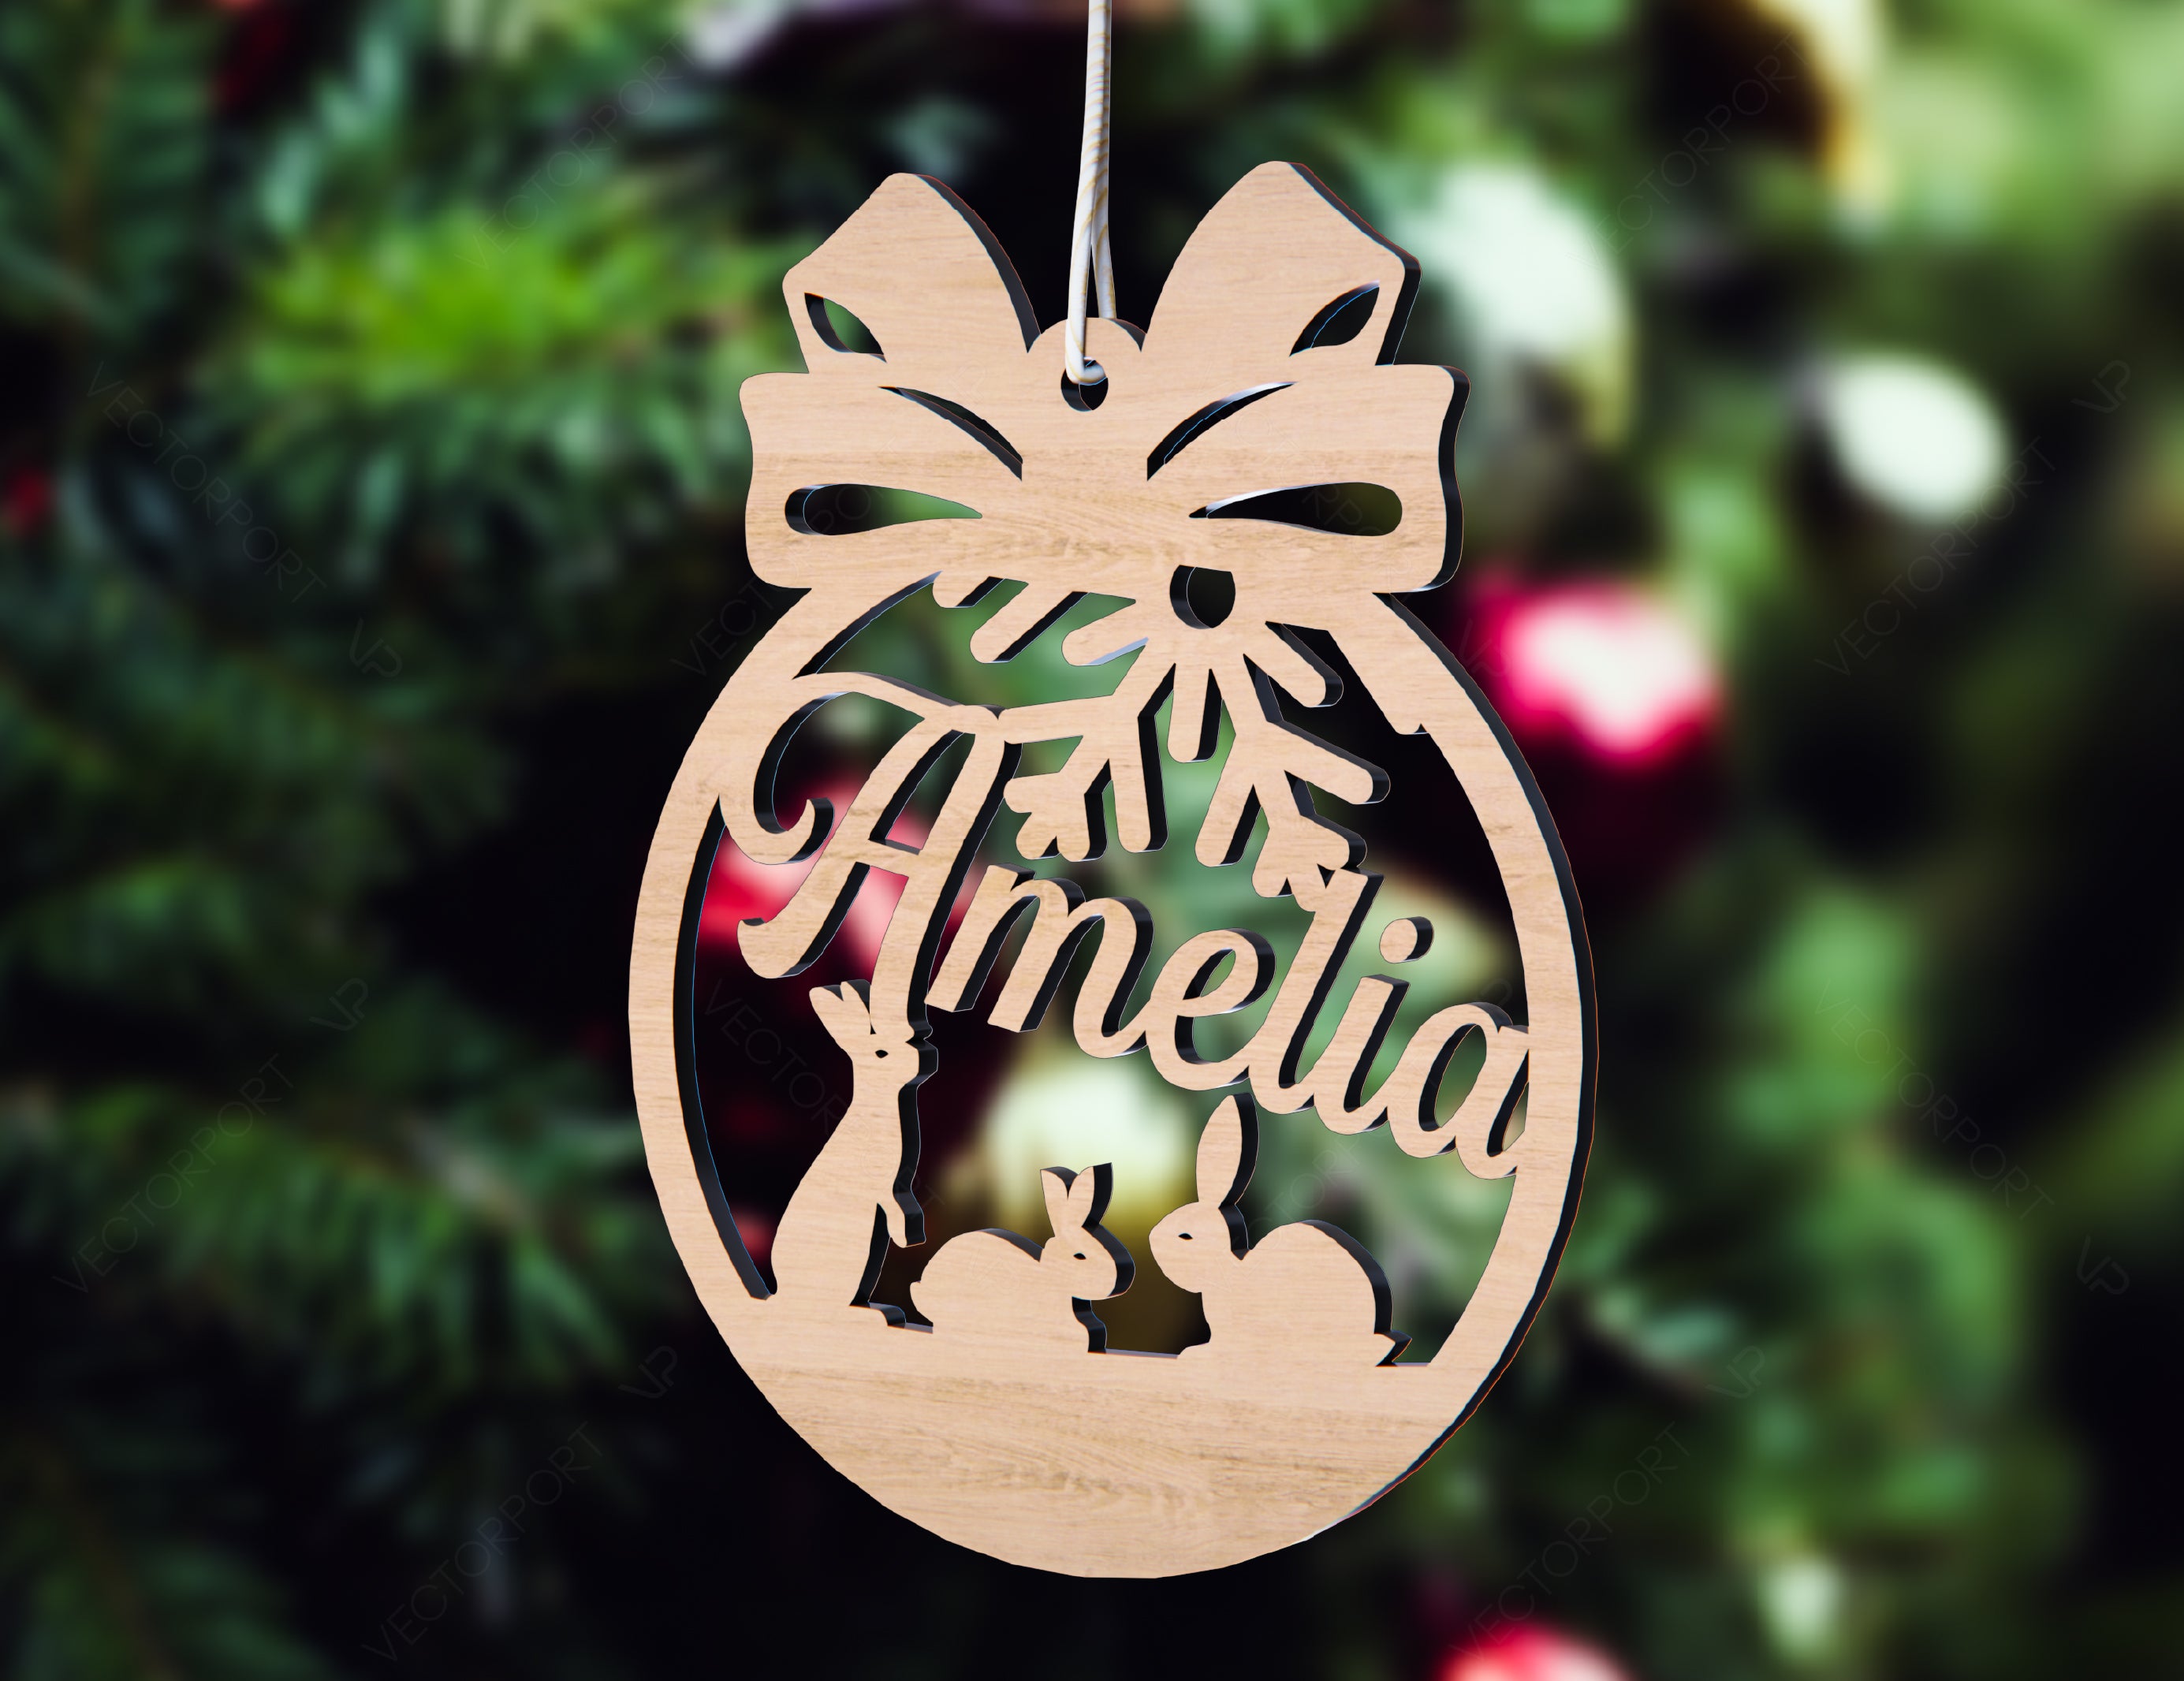 Personalized Christmas balls Tree Decorations with Name Craft Hanging Bauble Paper art templates cut file |#U098|